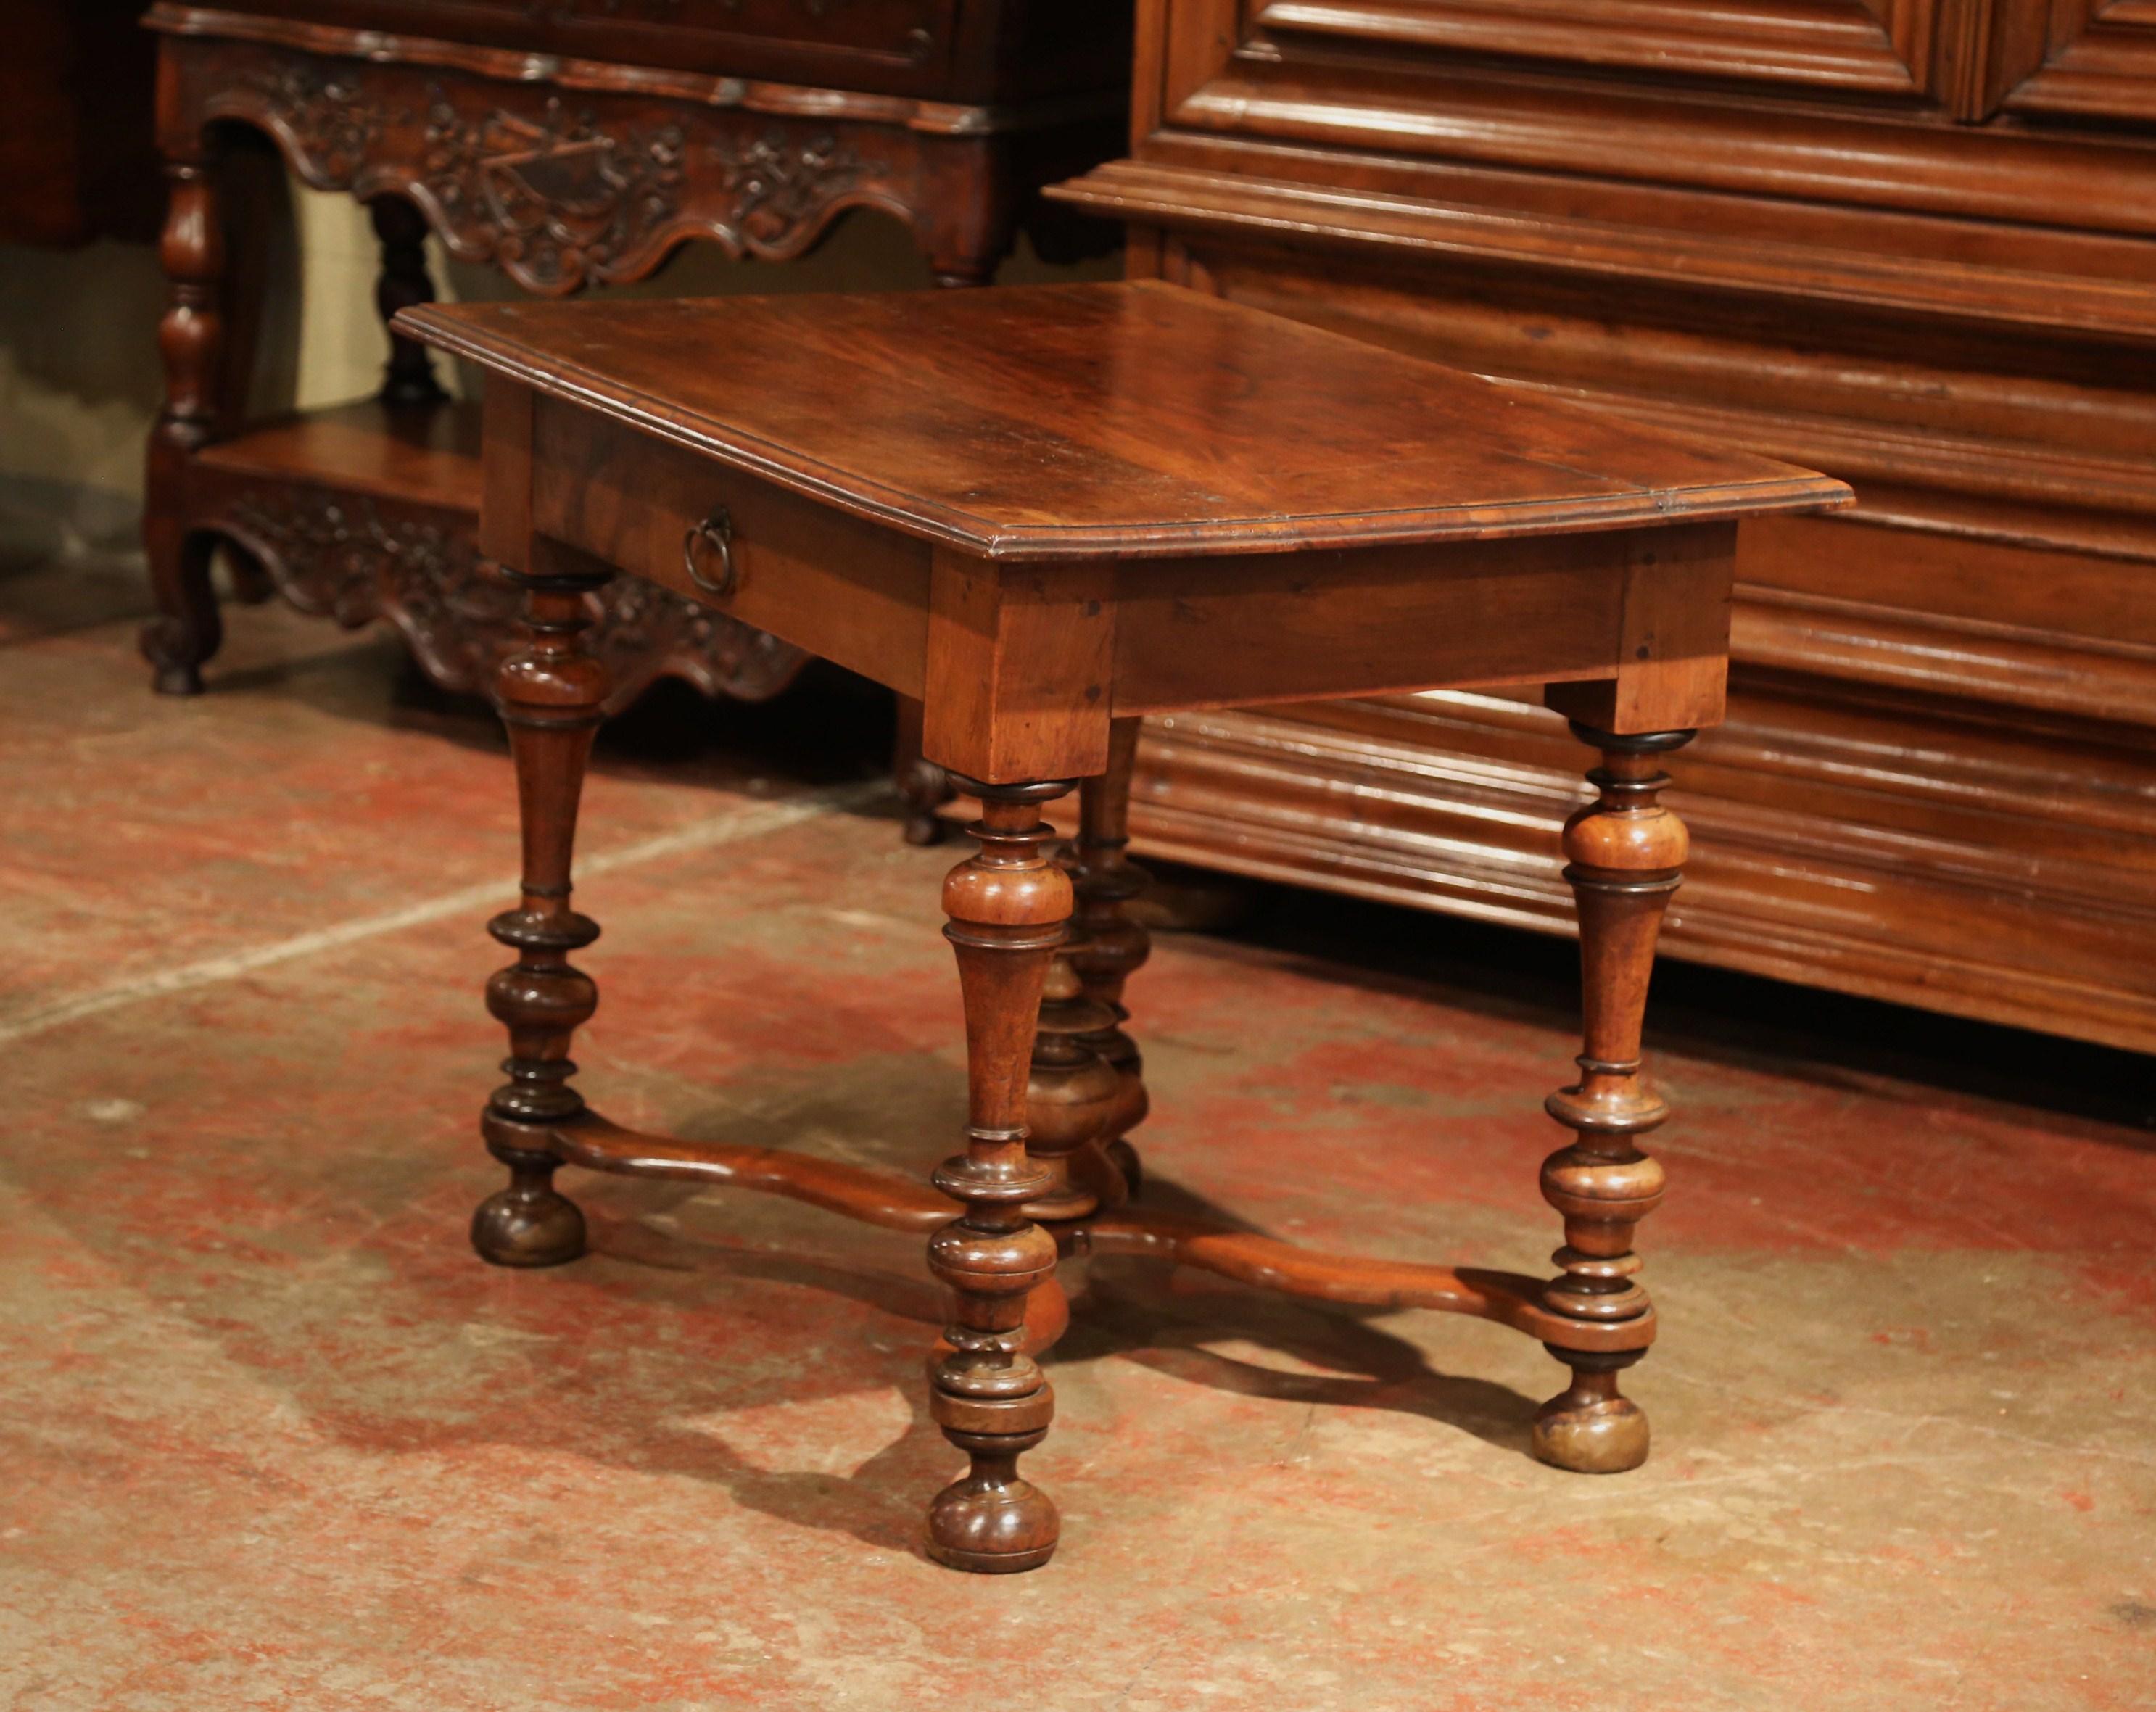 Incorporate extra, functional surface space into your living room with this elegant antique fruitwood table. Crafted in the Perigord region of France, circa 1860, the side table features a single drawer across the front that's embellished with its